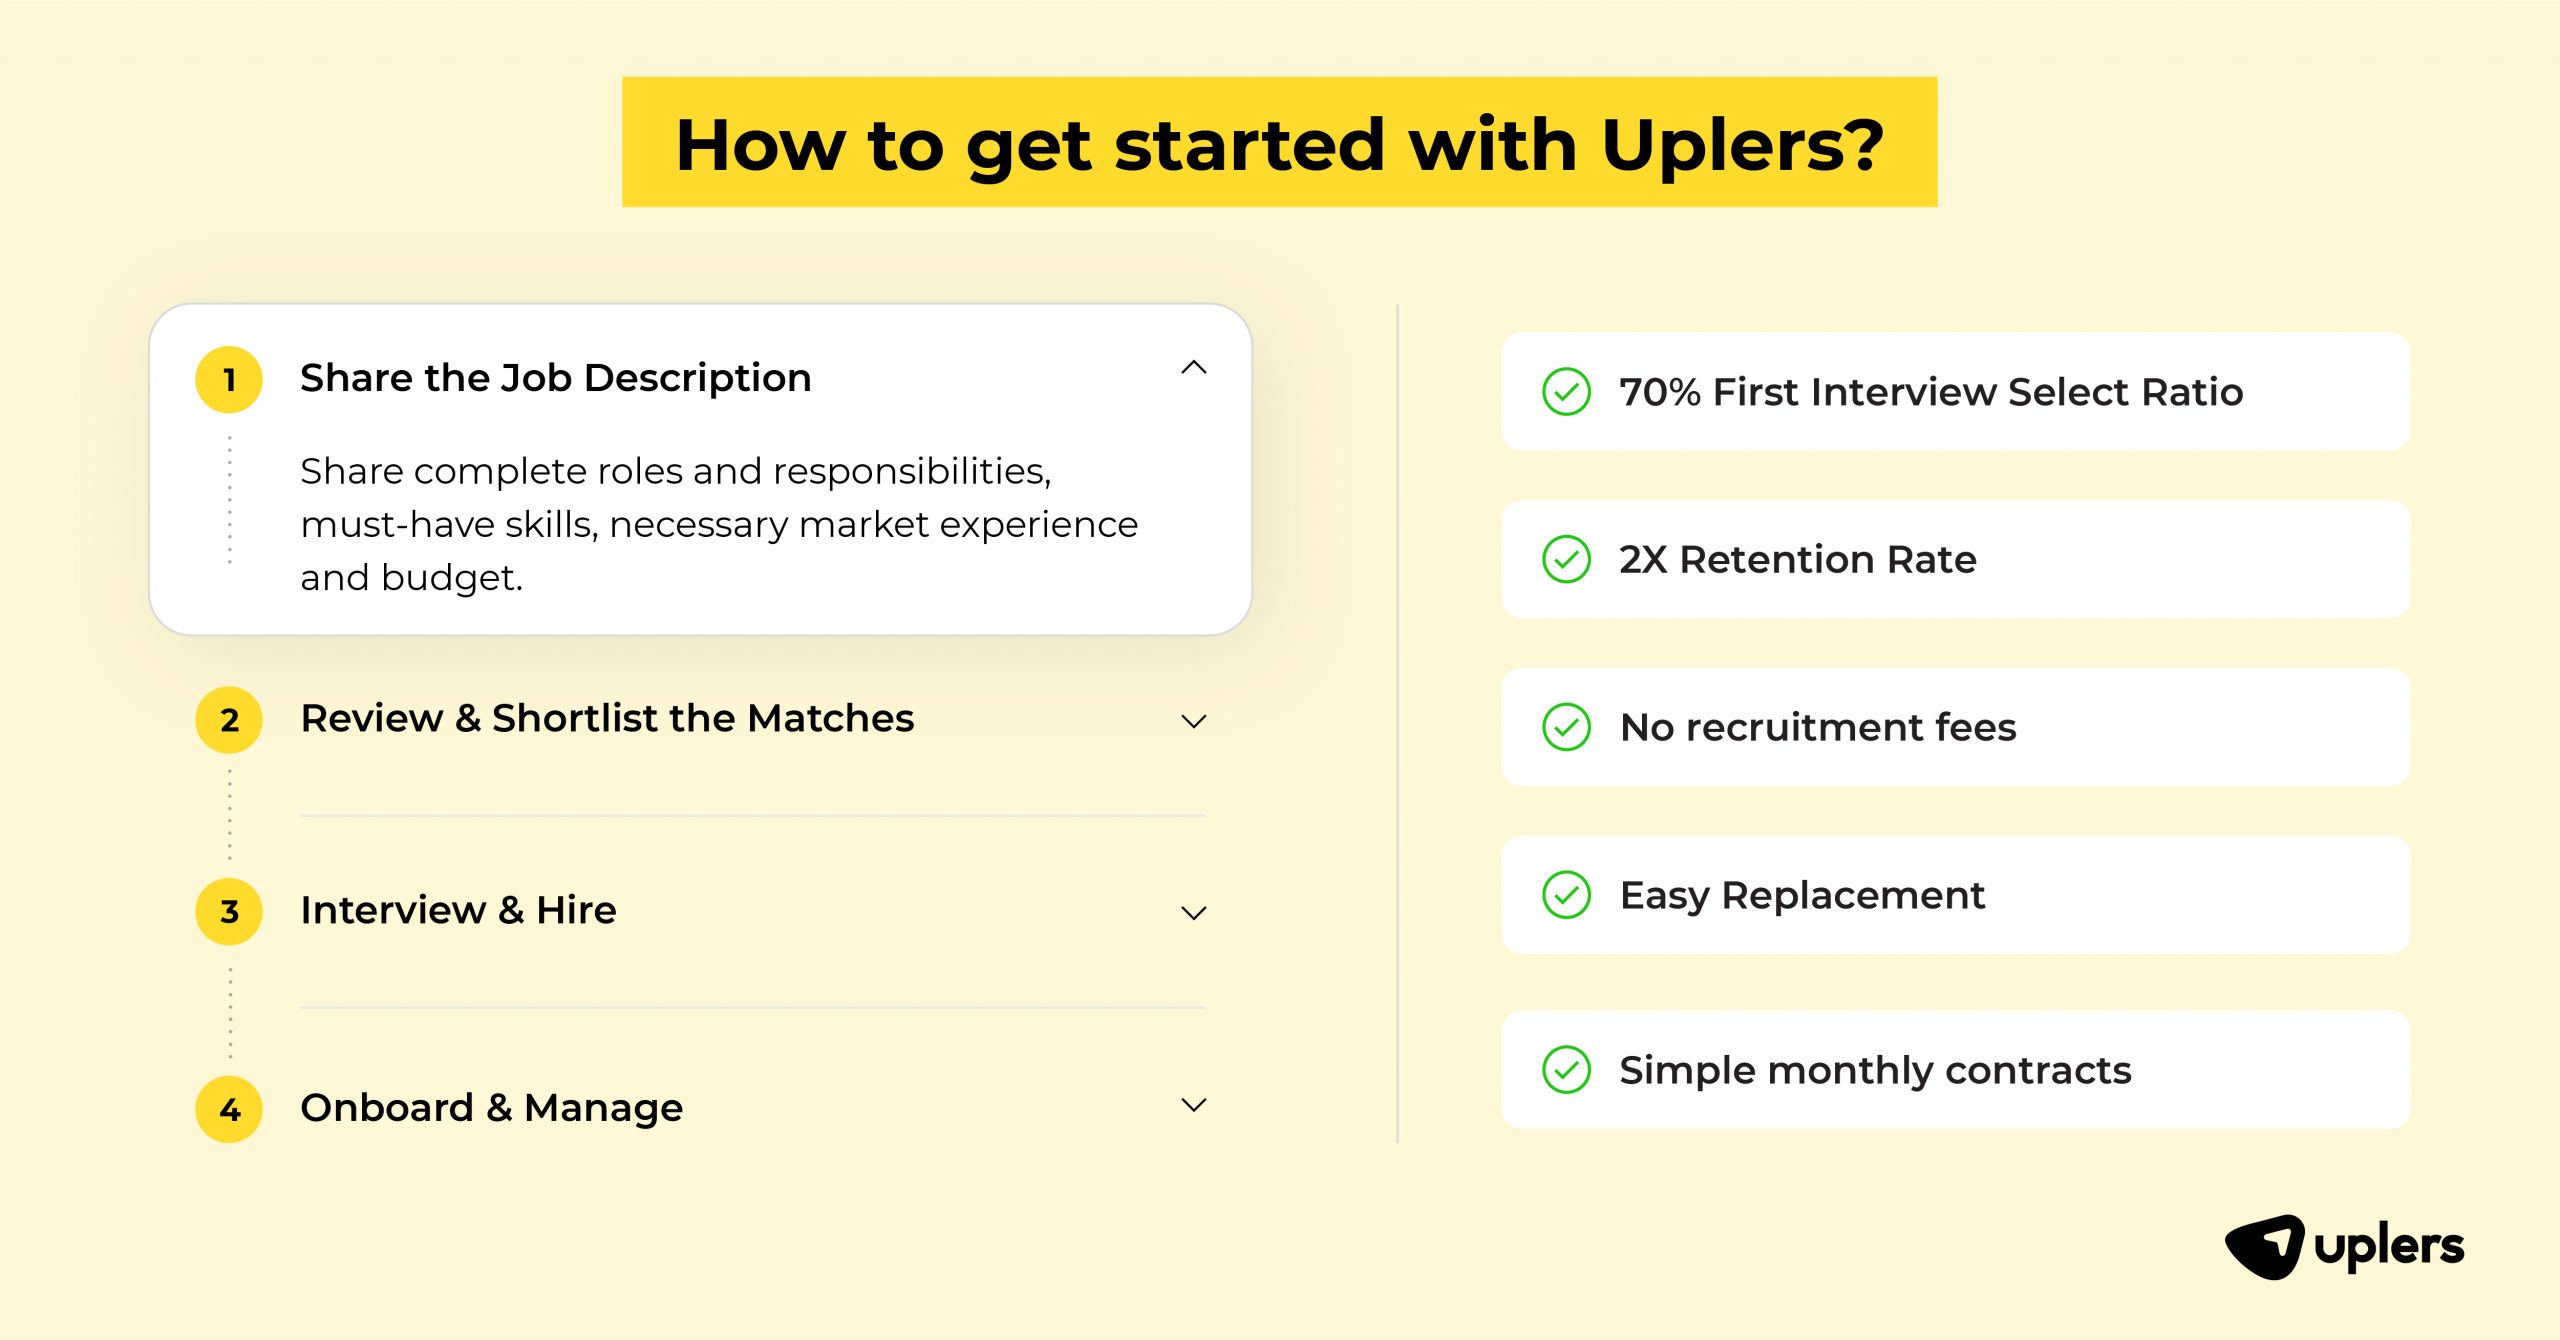 Tips on hiring with Uplers